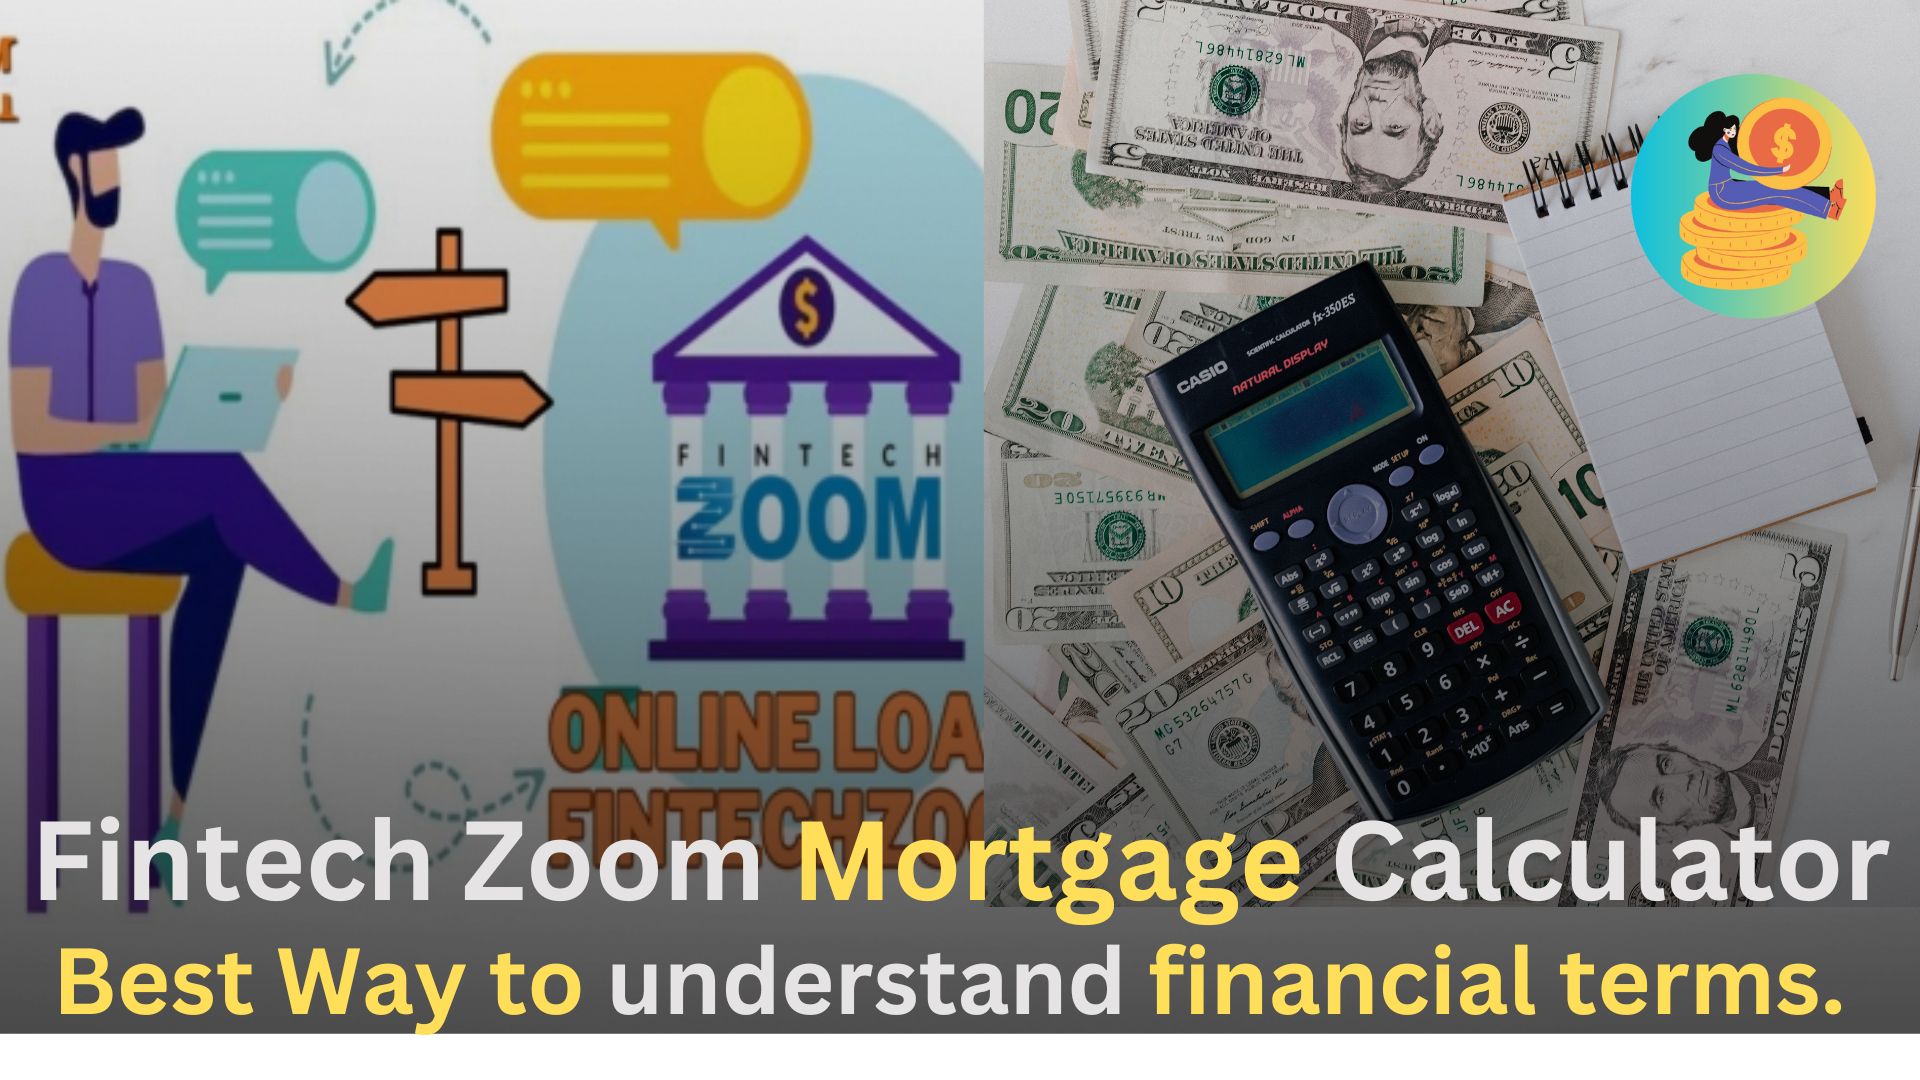 Fintech Zoom Mortgage Calculator,best way to understand financial terms.